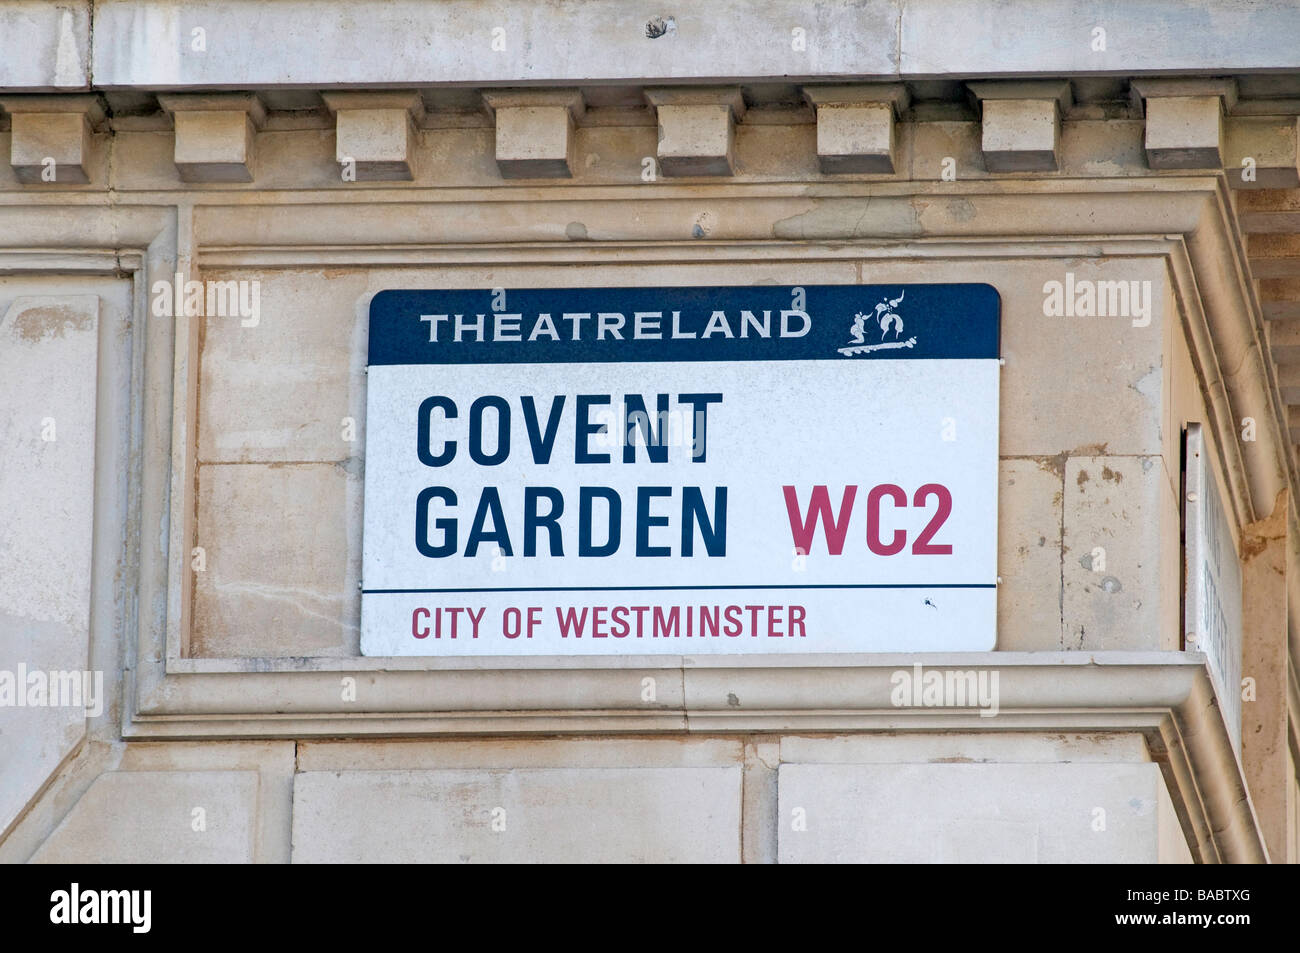 Street sign for Covent Garden WC2 City of Westminster in London ...